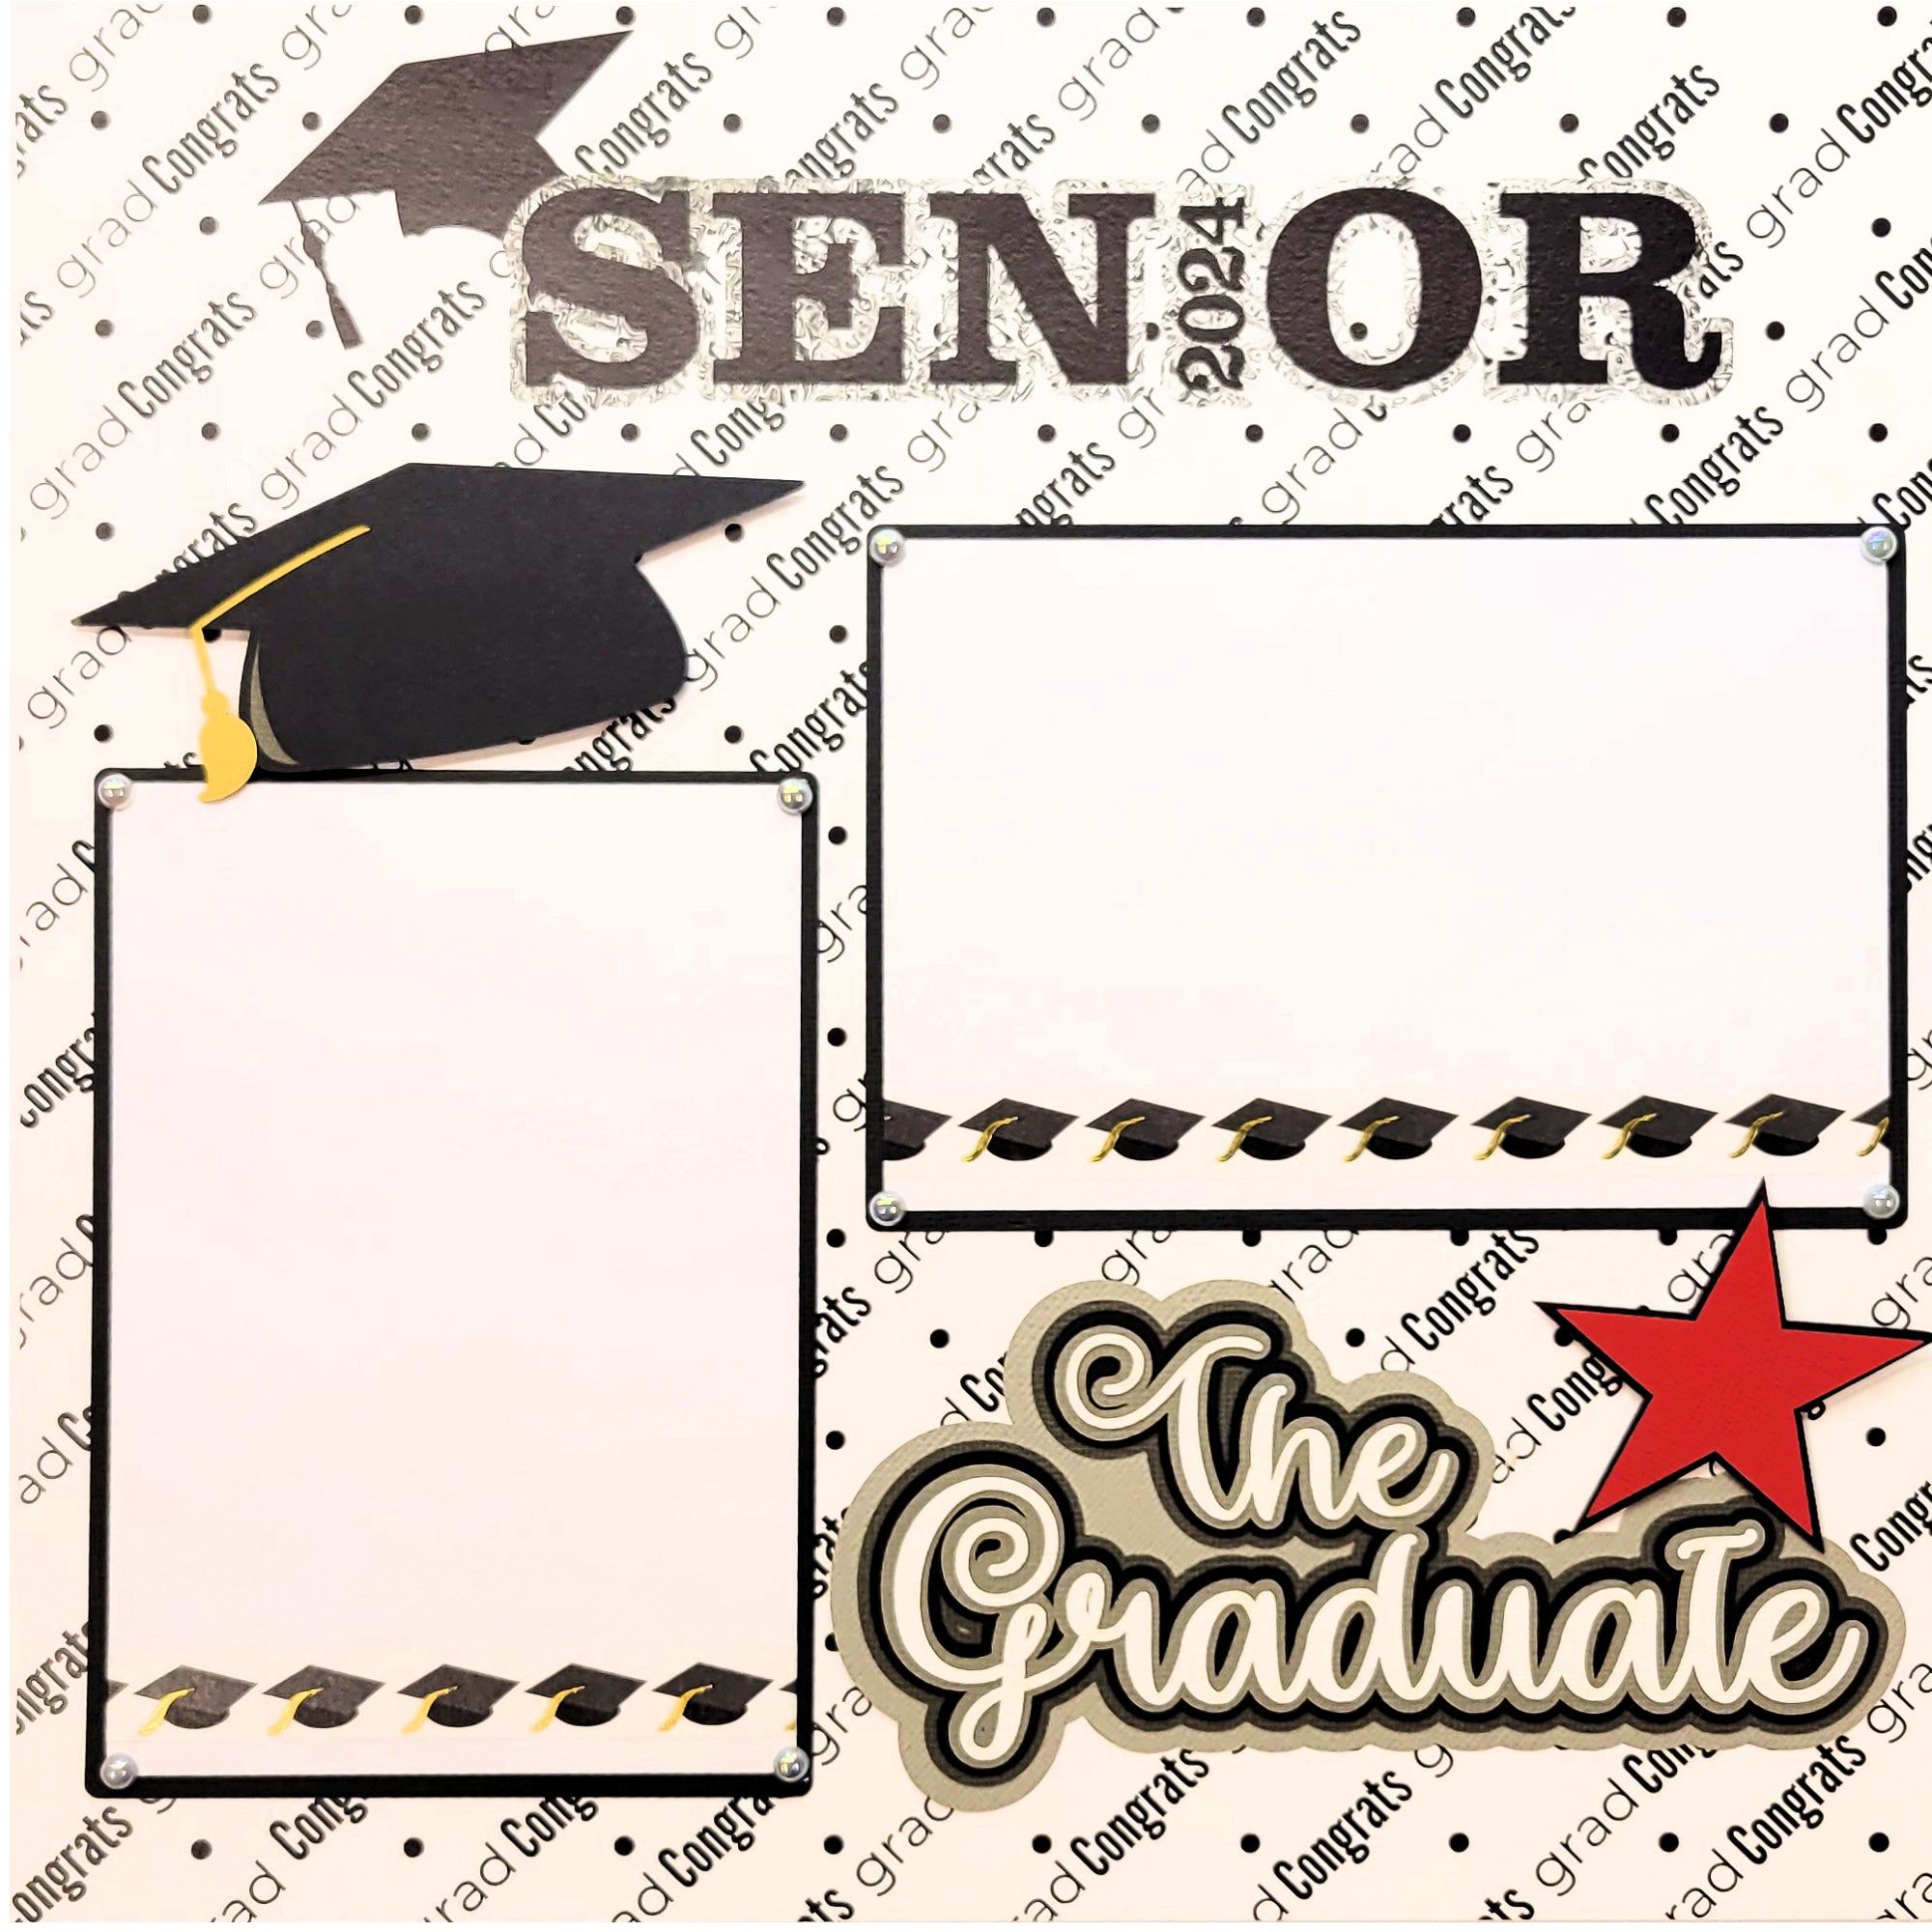 Graduation Collection Senior Class of 2024 Customized, Premade Scrapbook Pages by SSC Designs